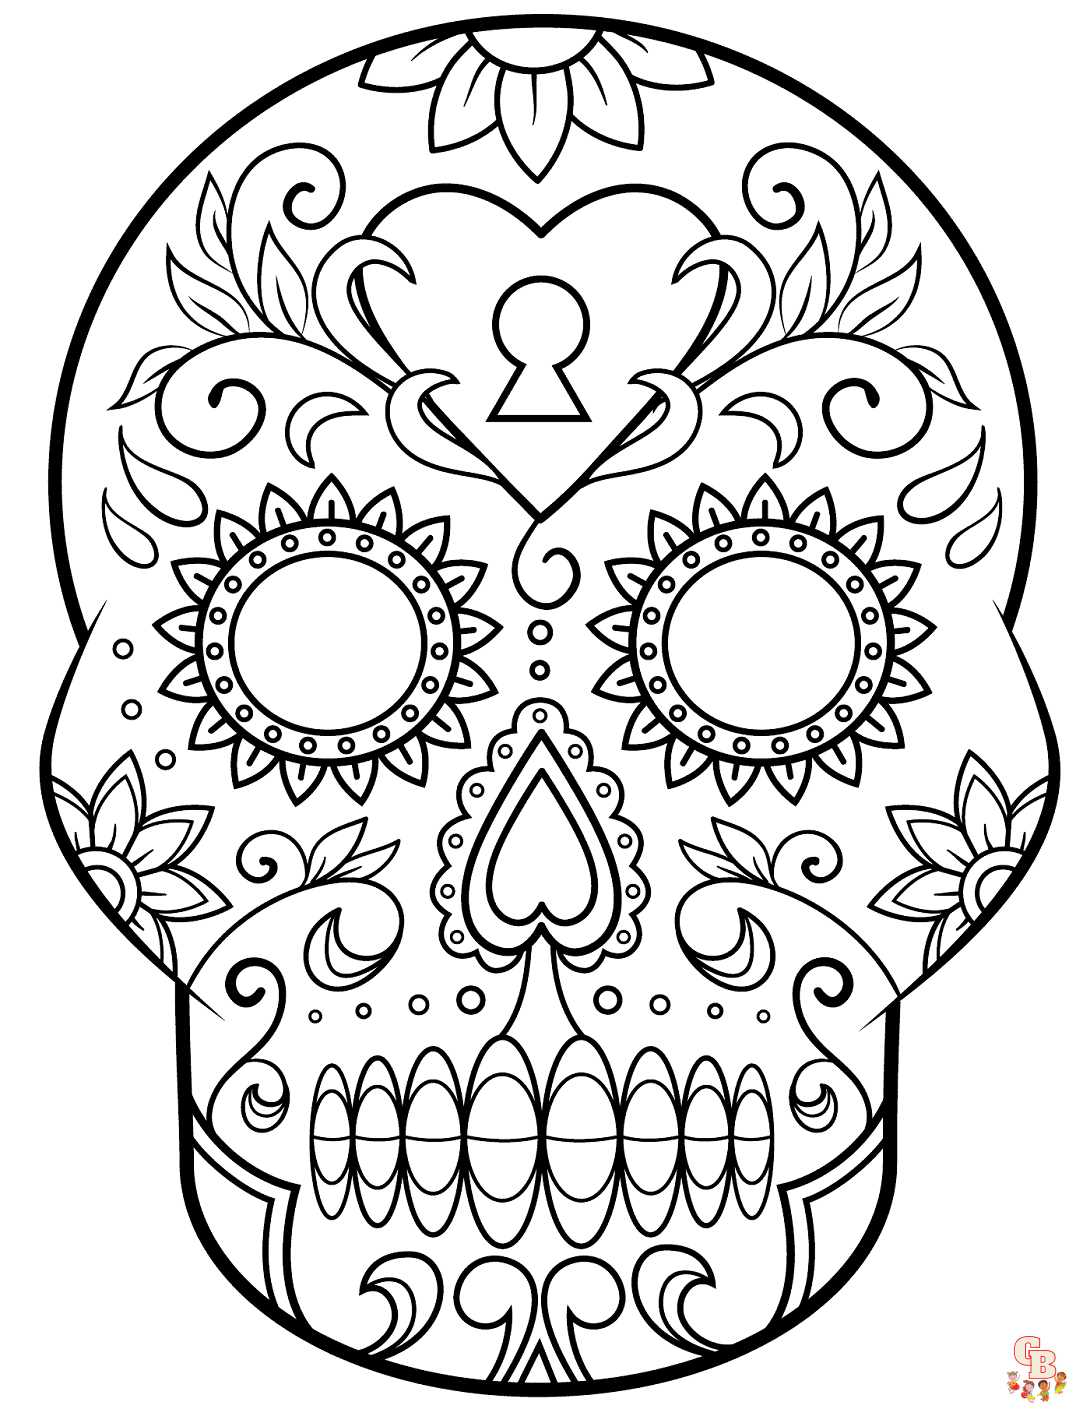 Printable Day of the dead coloring sheets